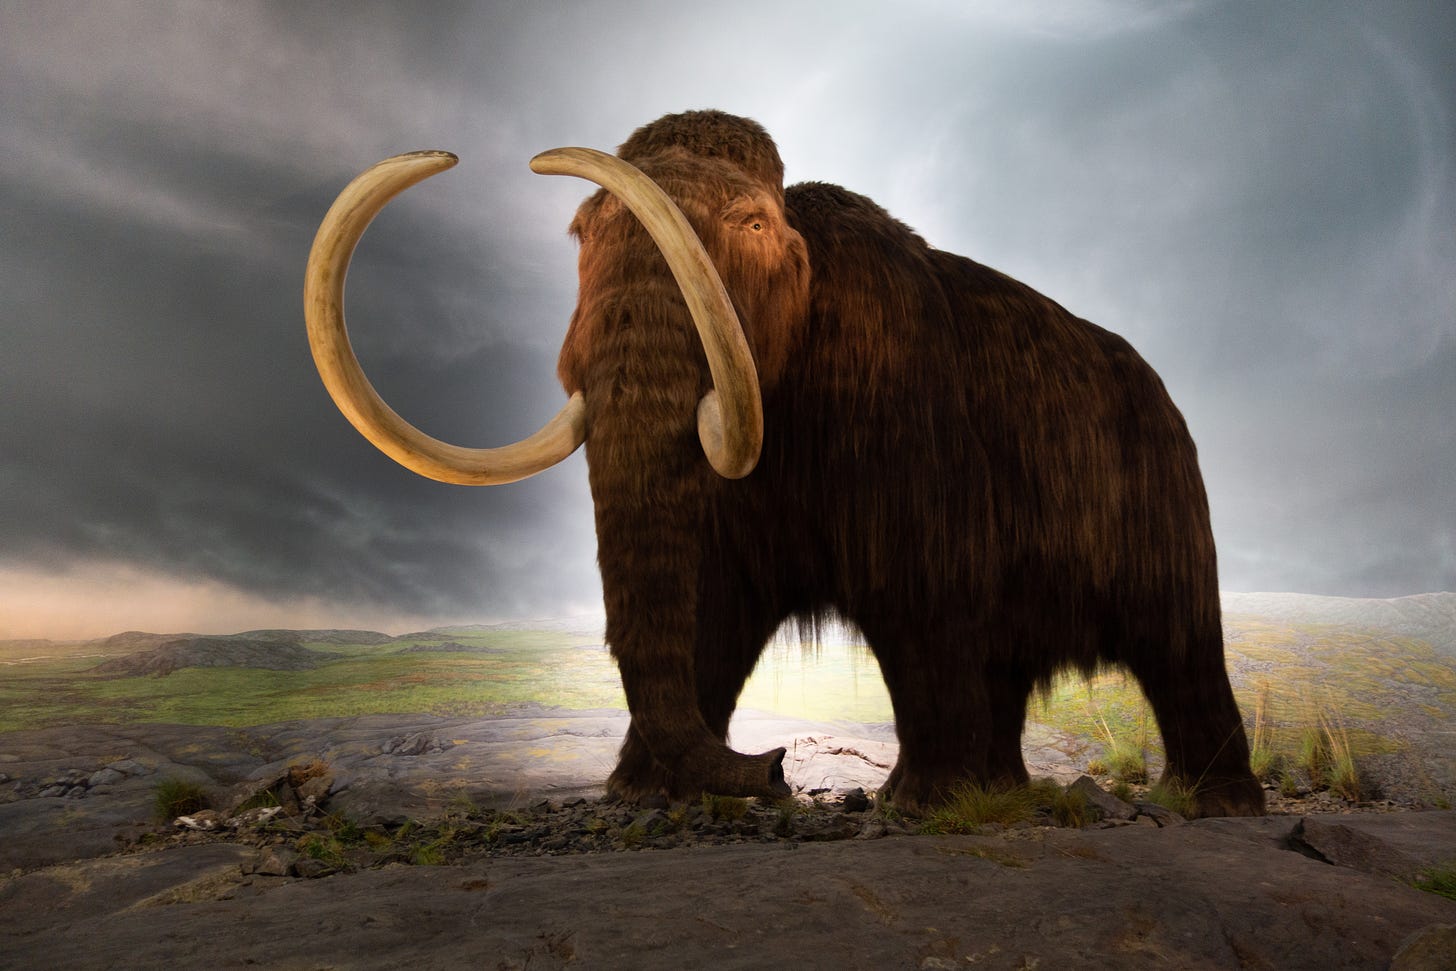 Depiction of Wooly Mammoth